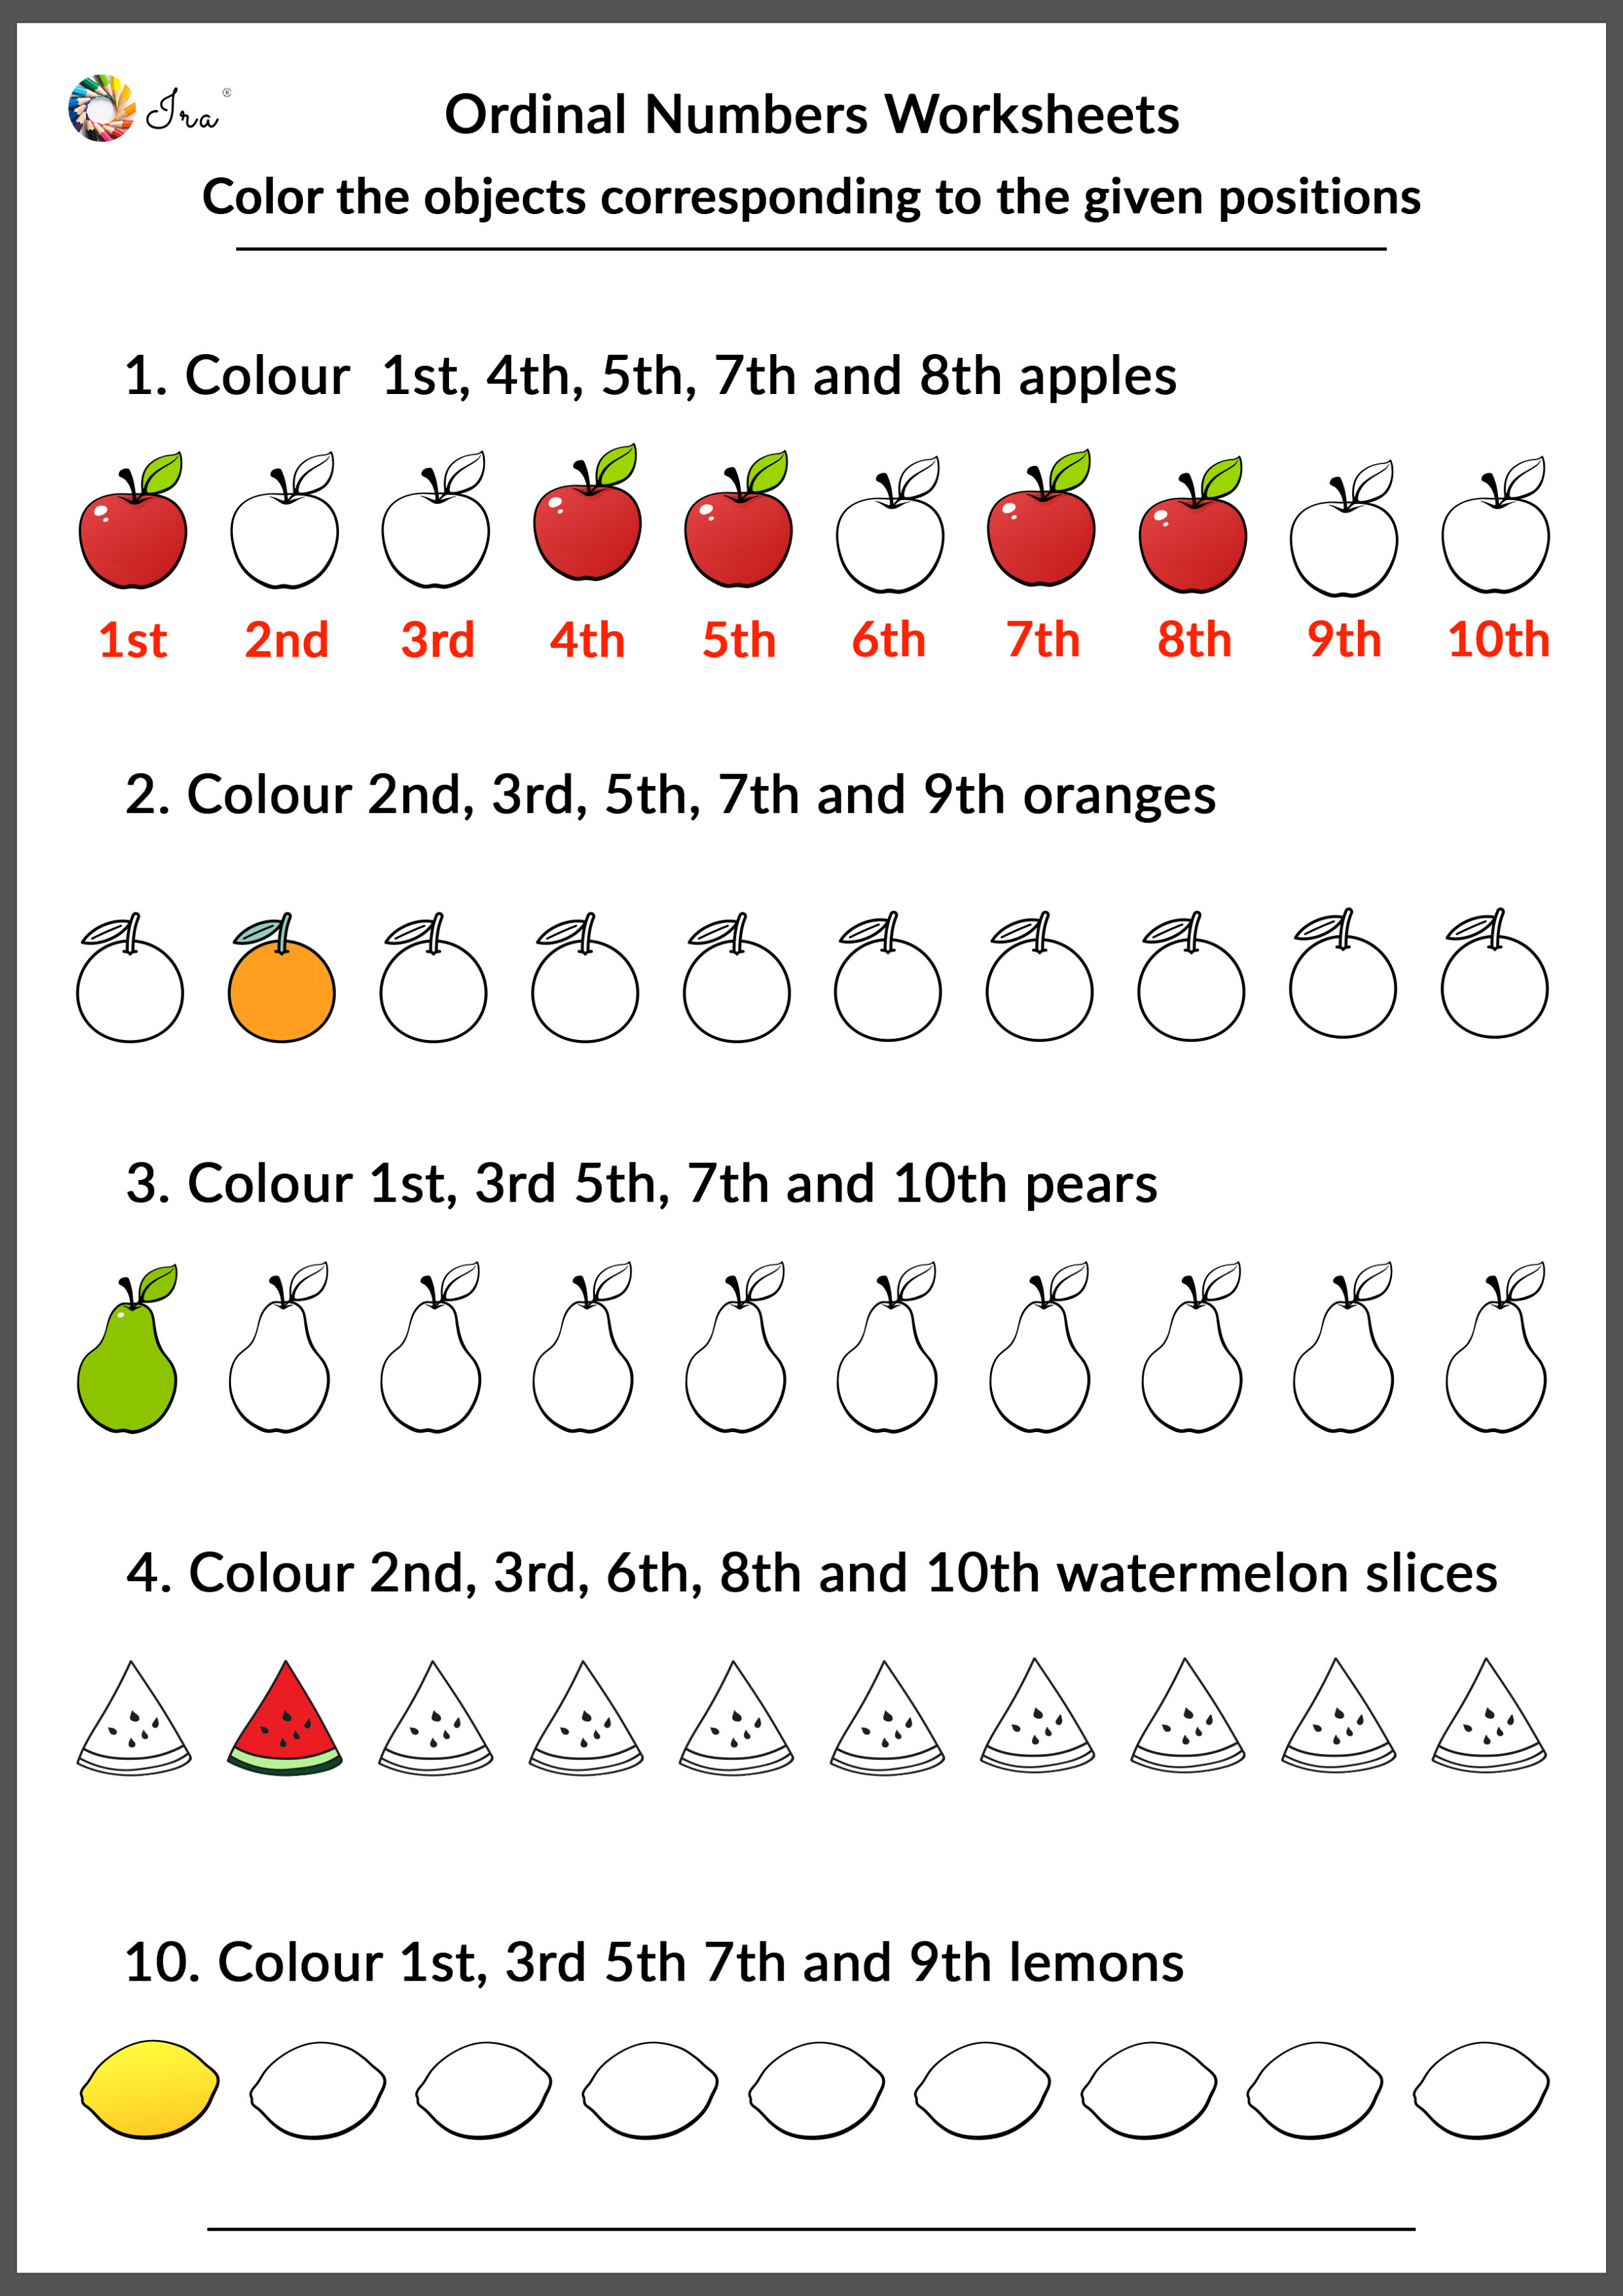 Ordinal Number Worksheet Color The Objects Corresponding 